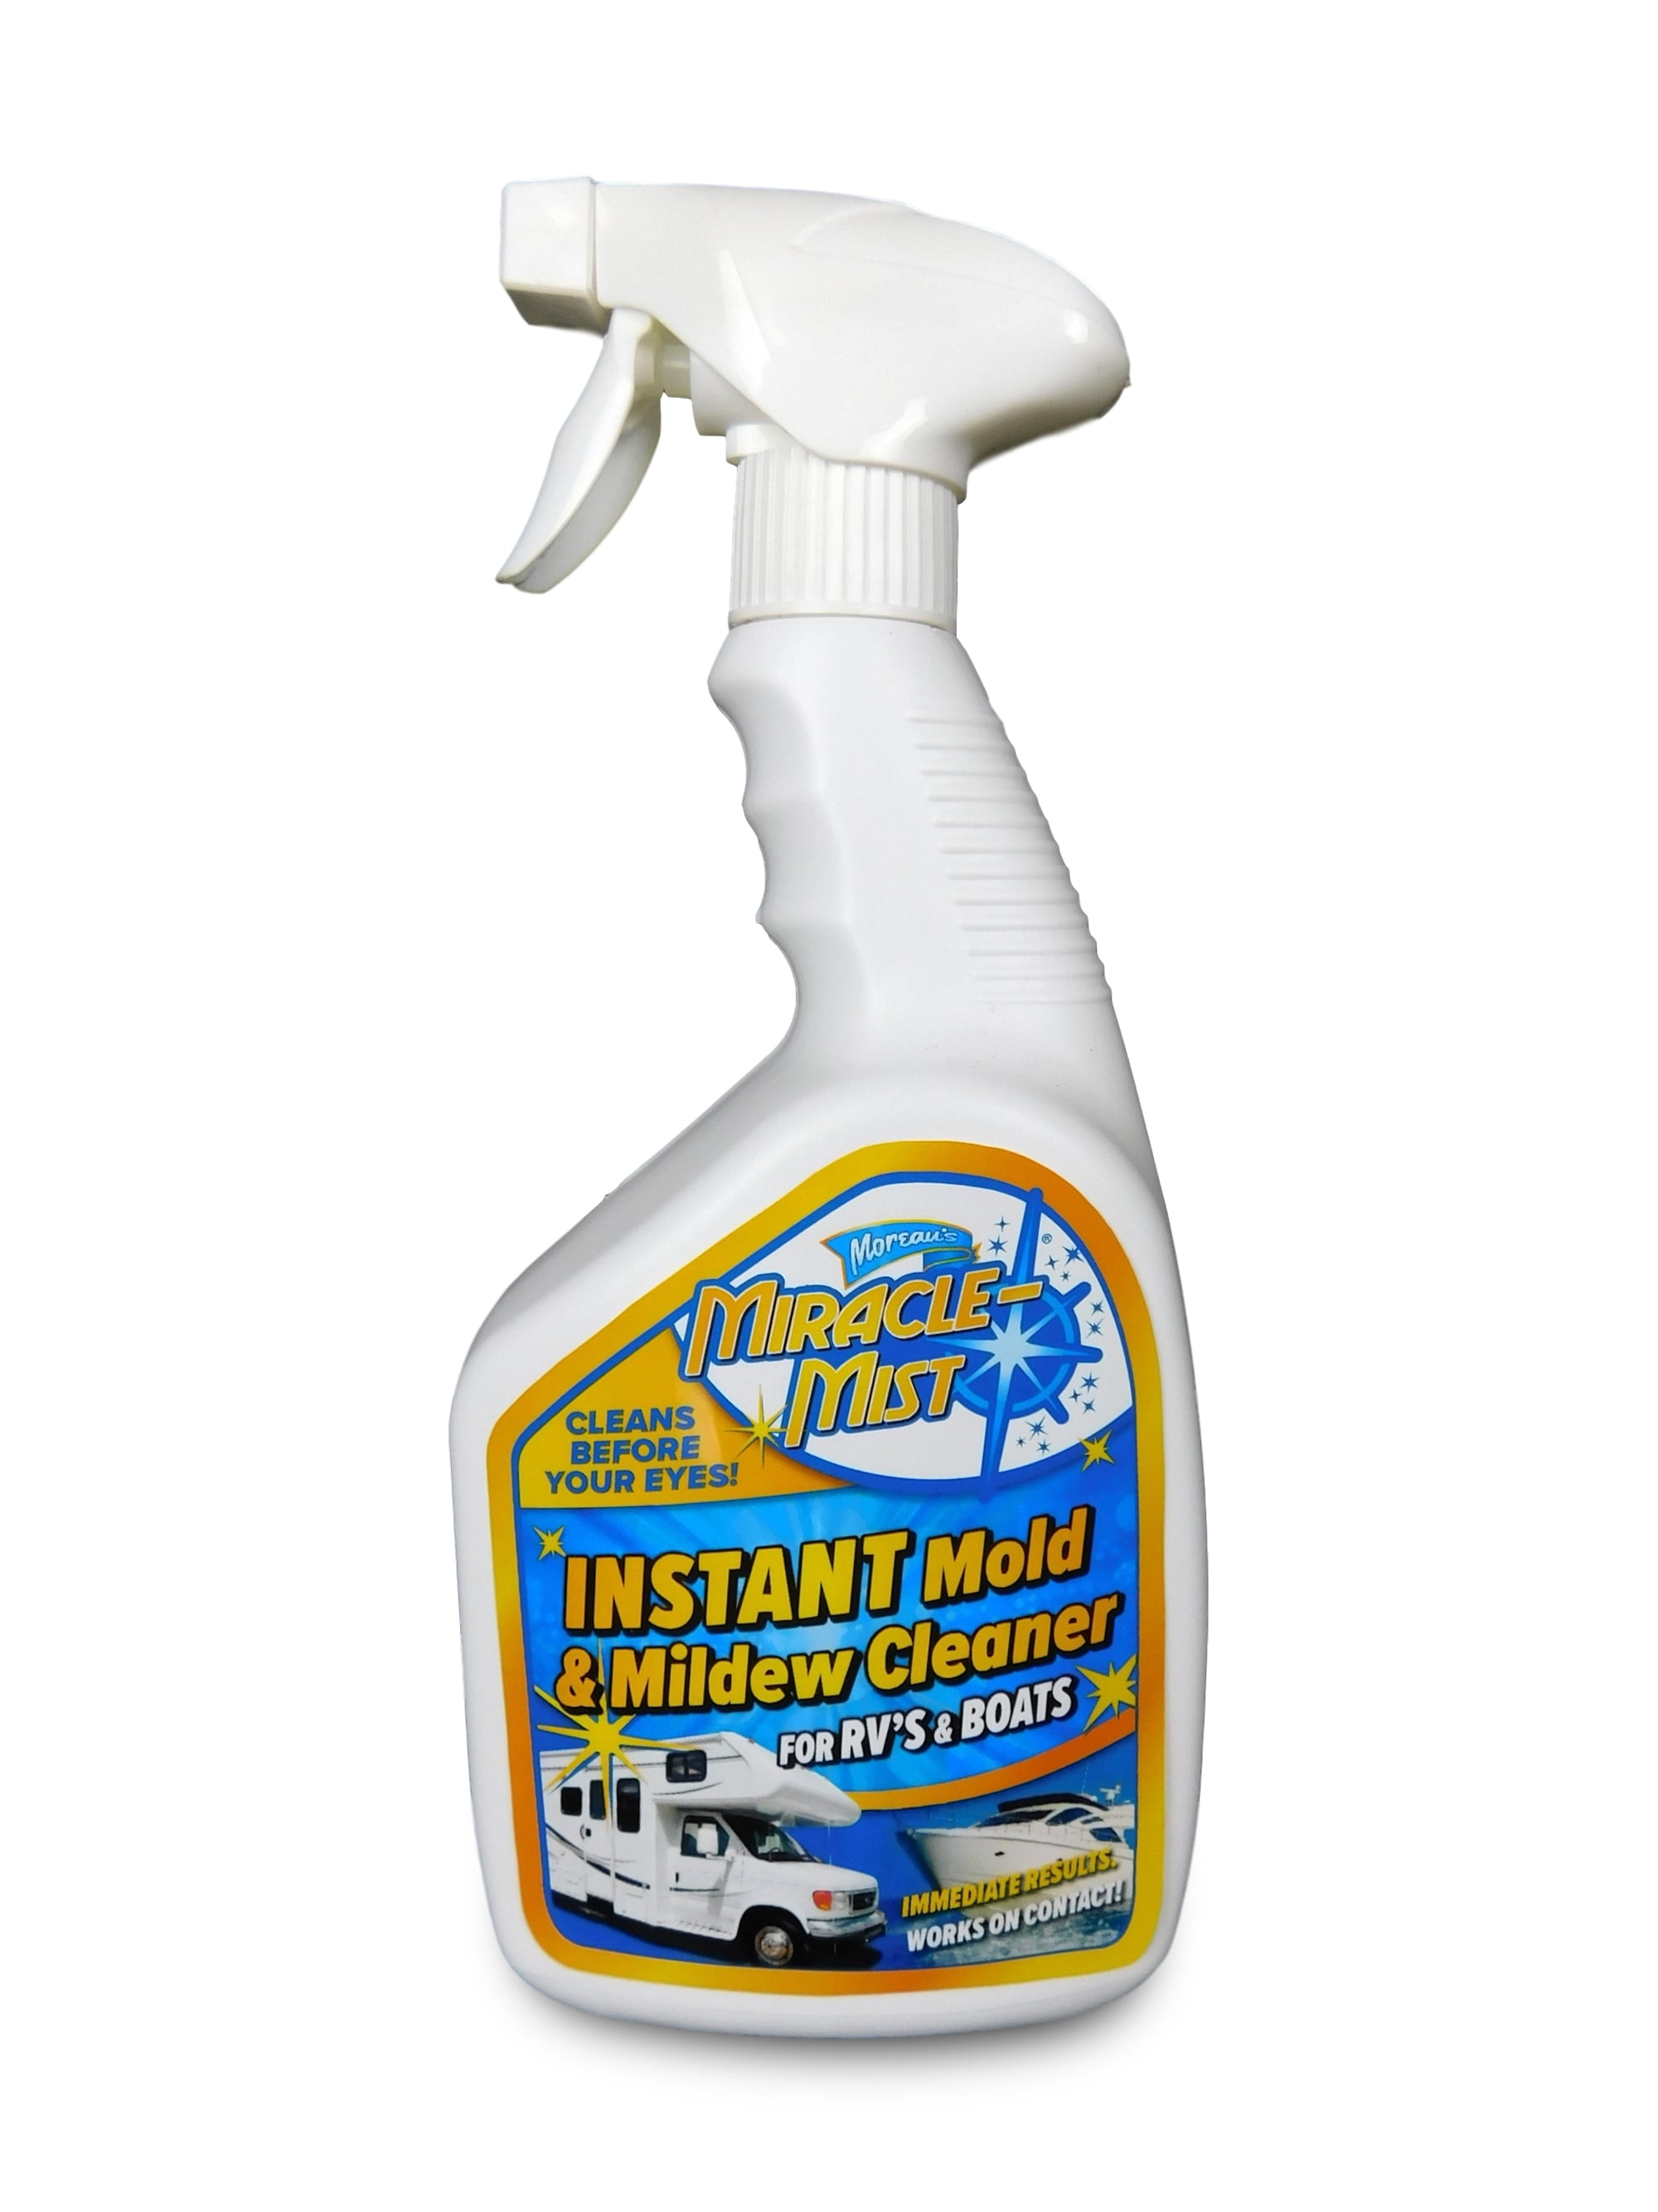 Not Just for Boats! Mildew Remover has TONS of HOUSEHOULD Use!